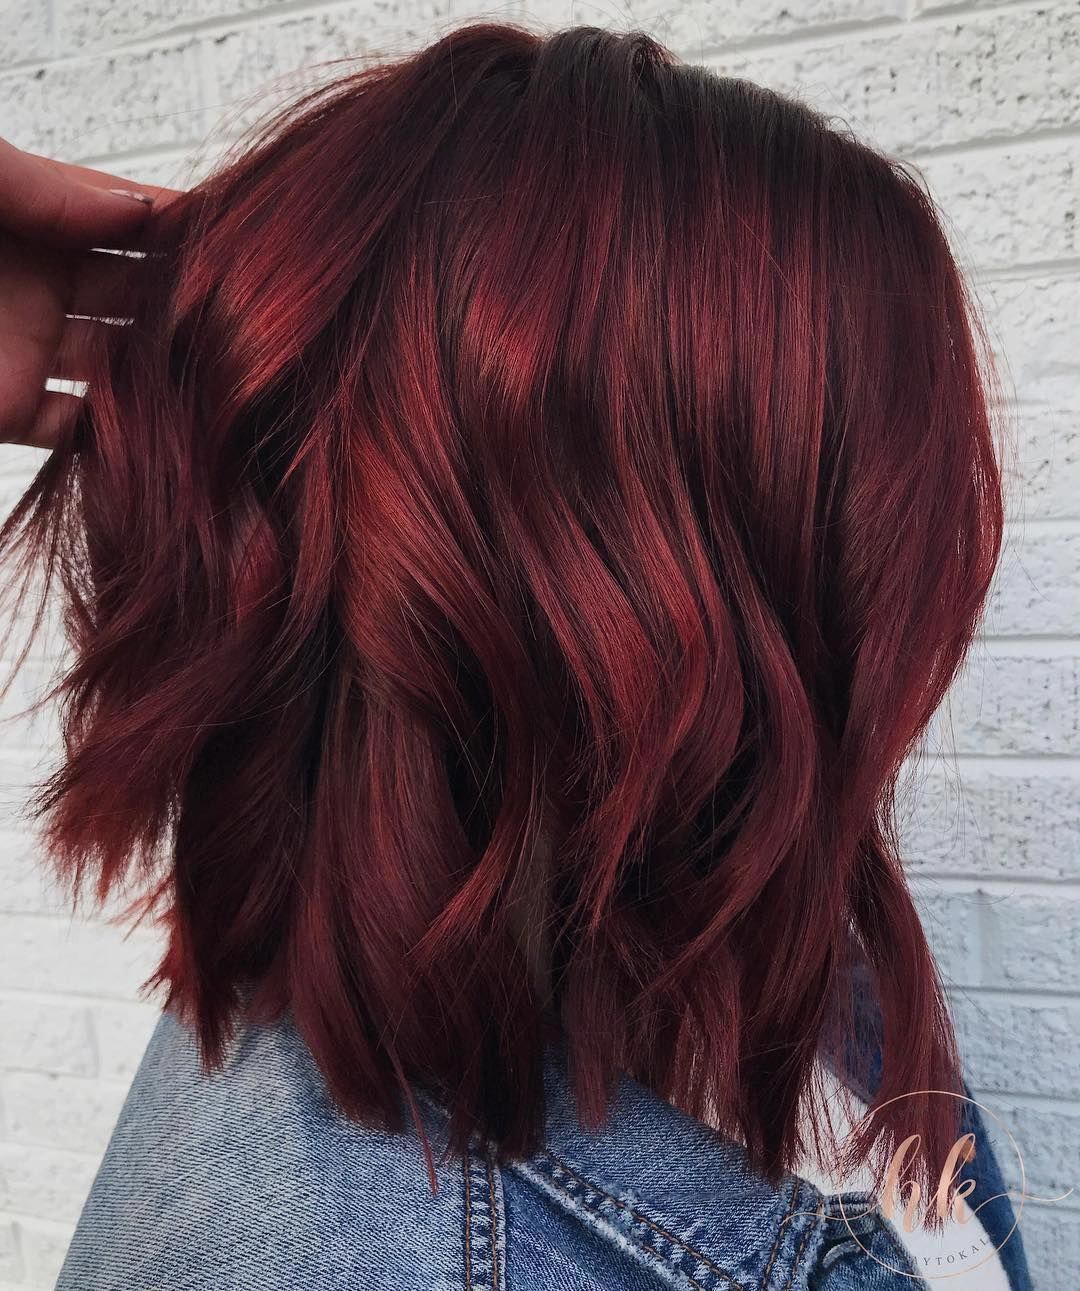 Introducing-the-new-drink-inspired-hair-color-trend-mulled-wine-hair.-Check.jpg